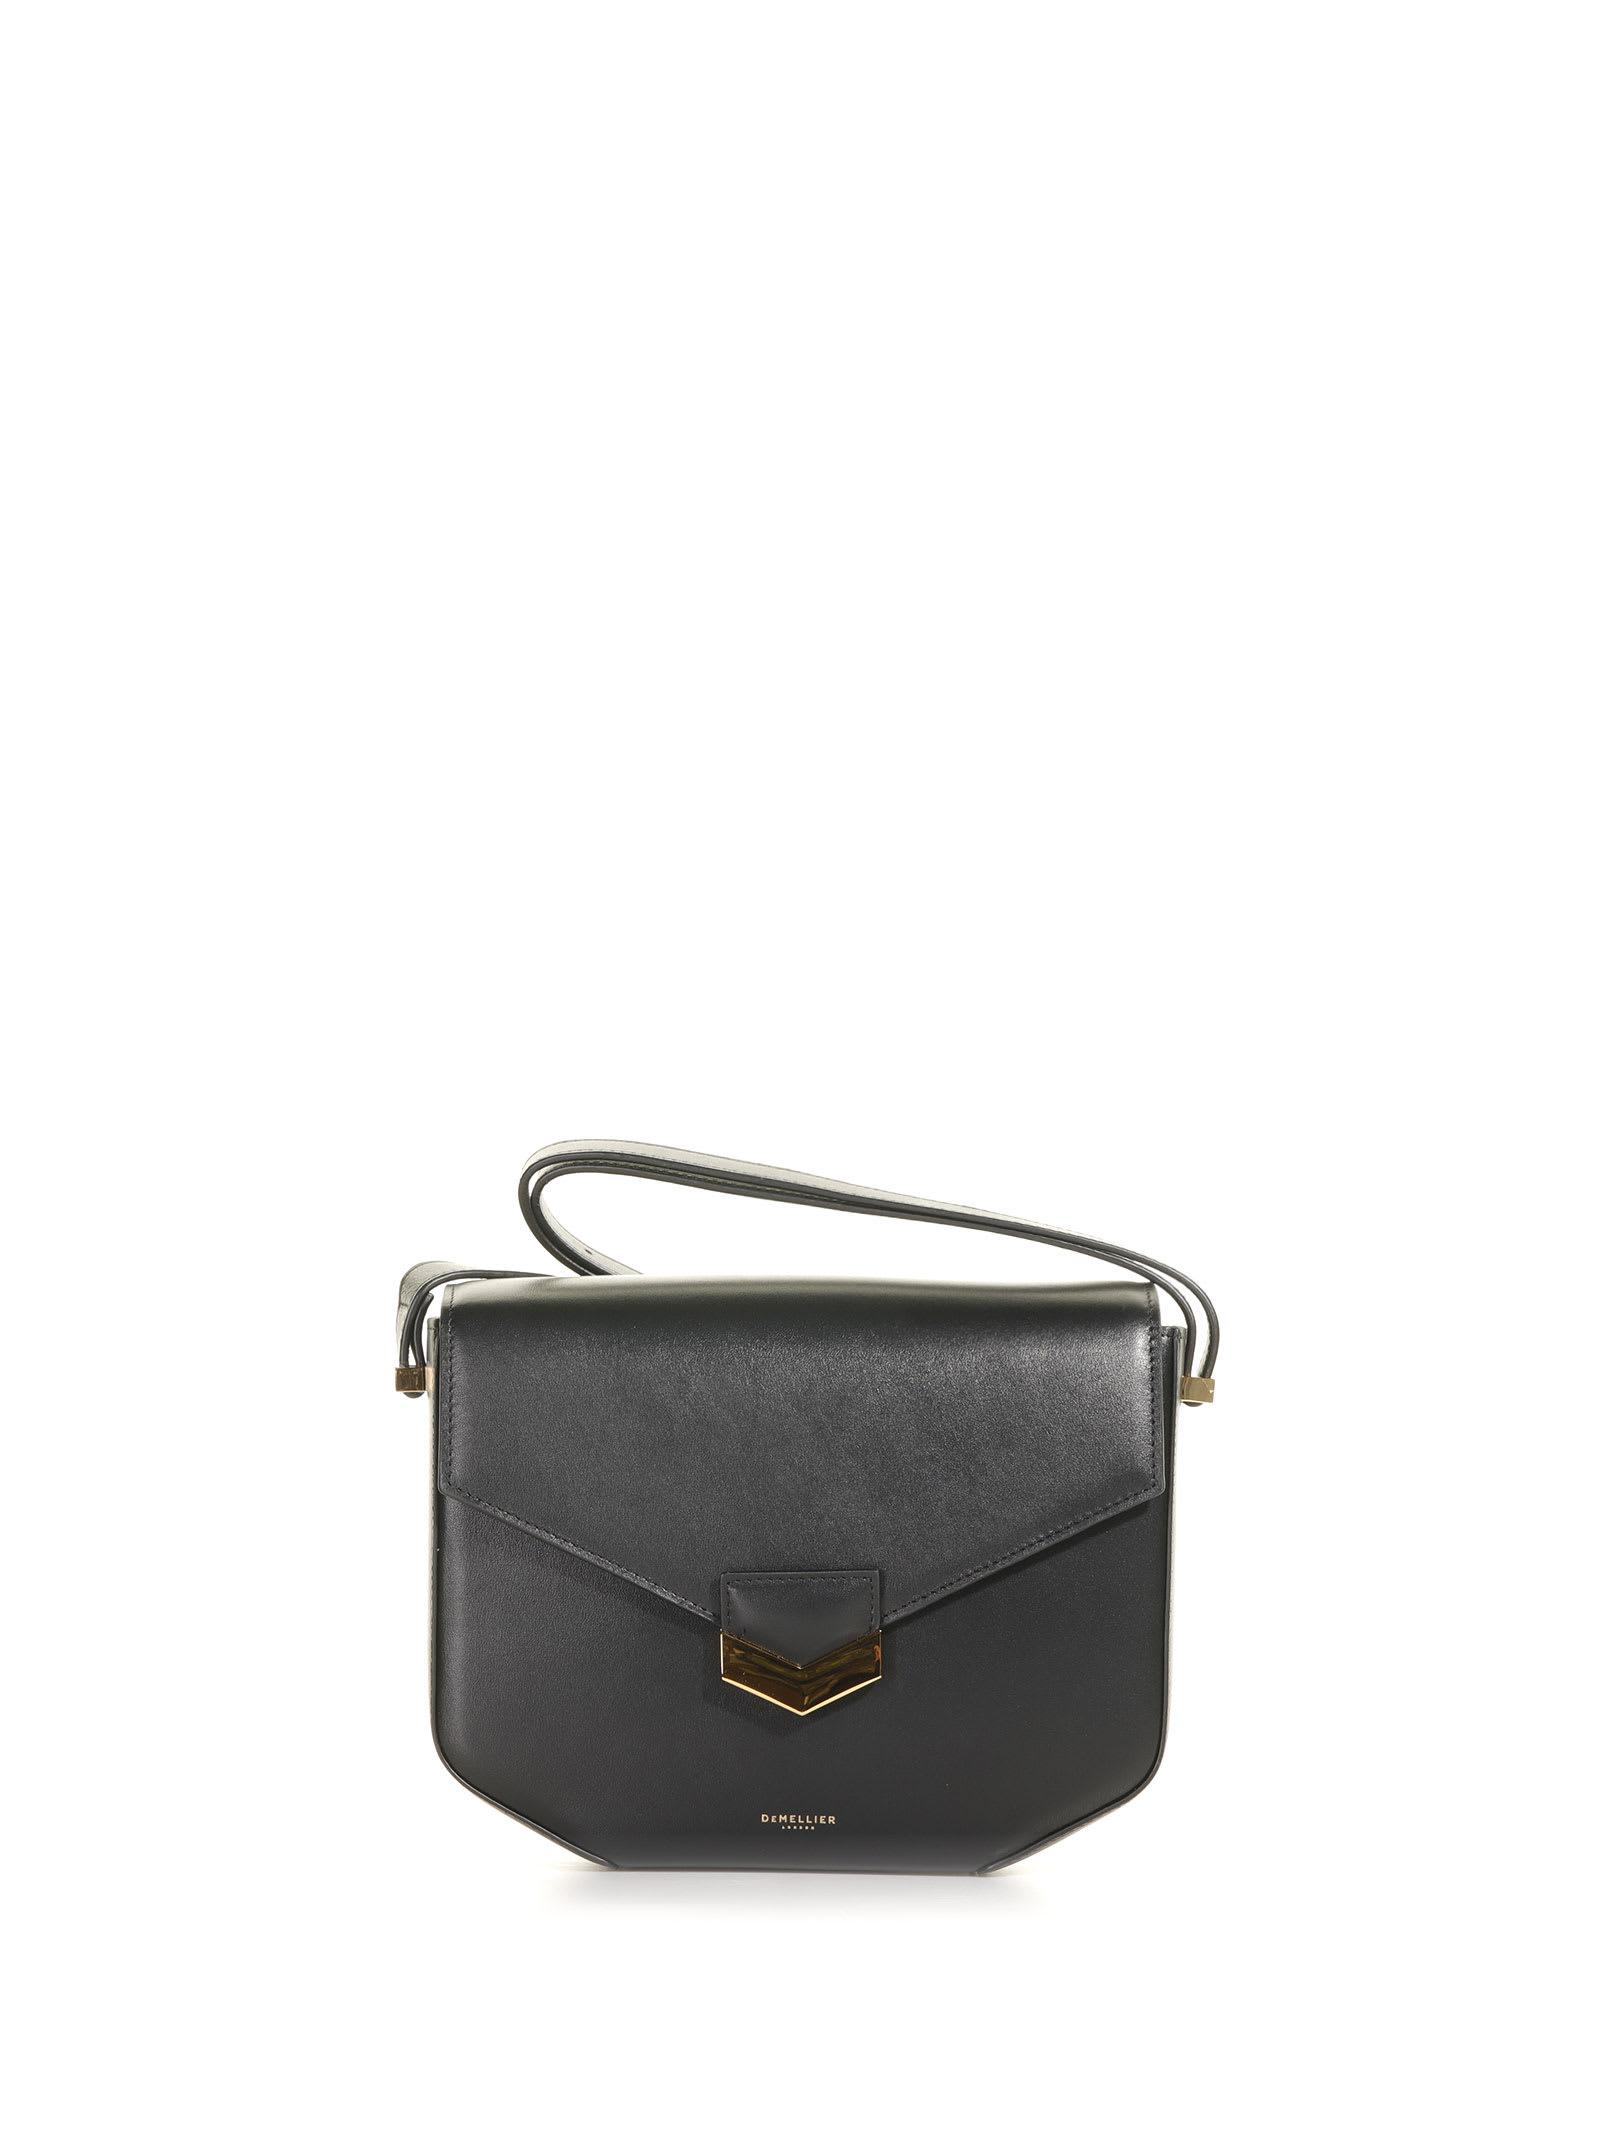 DeMellier The London Shoulder Bag In Leather in Gray | Lyst